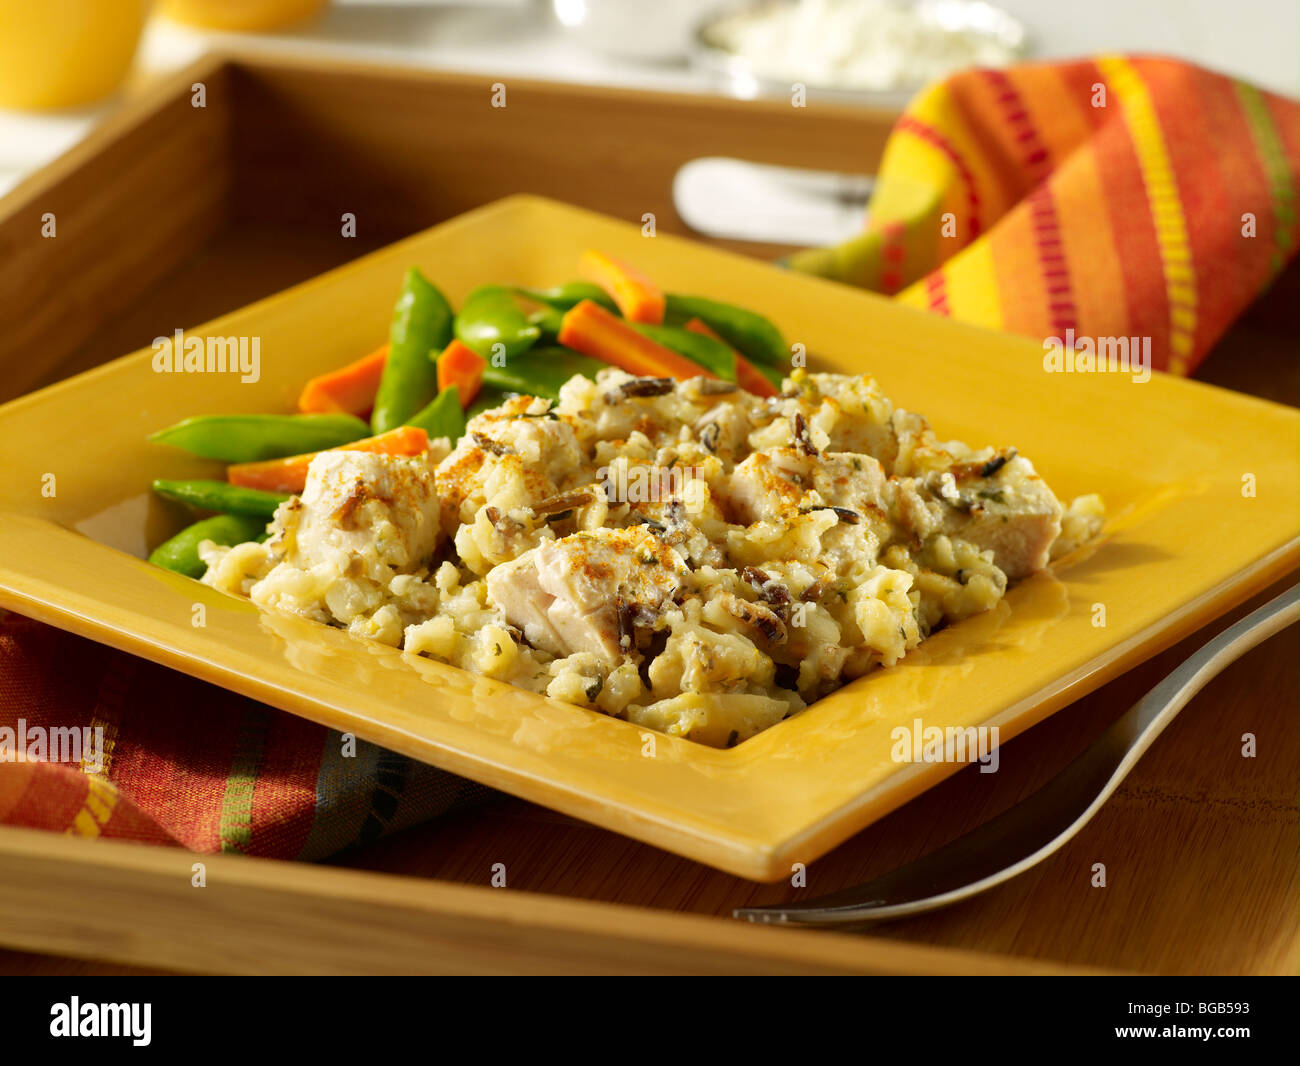 Chicken and wild rice casserole with vegetables Stock Photo